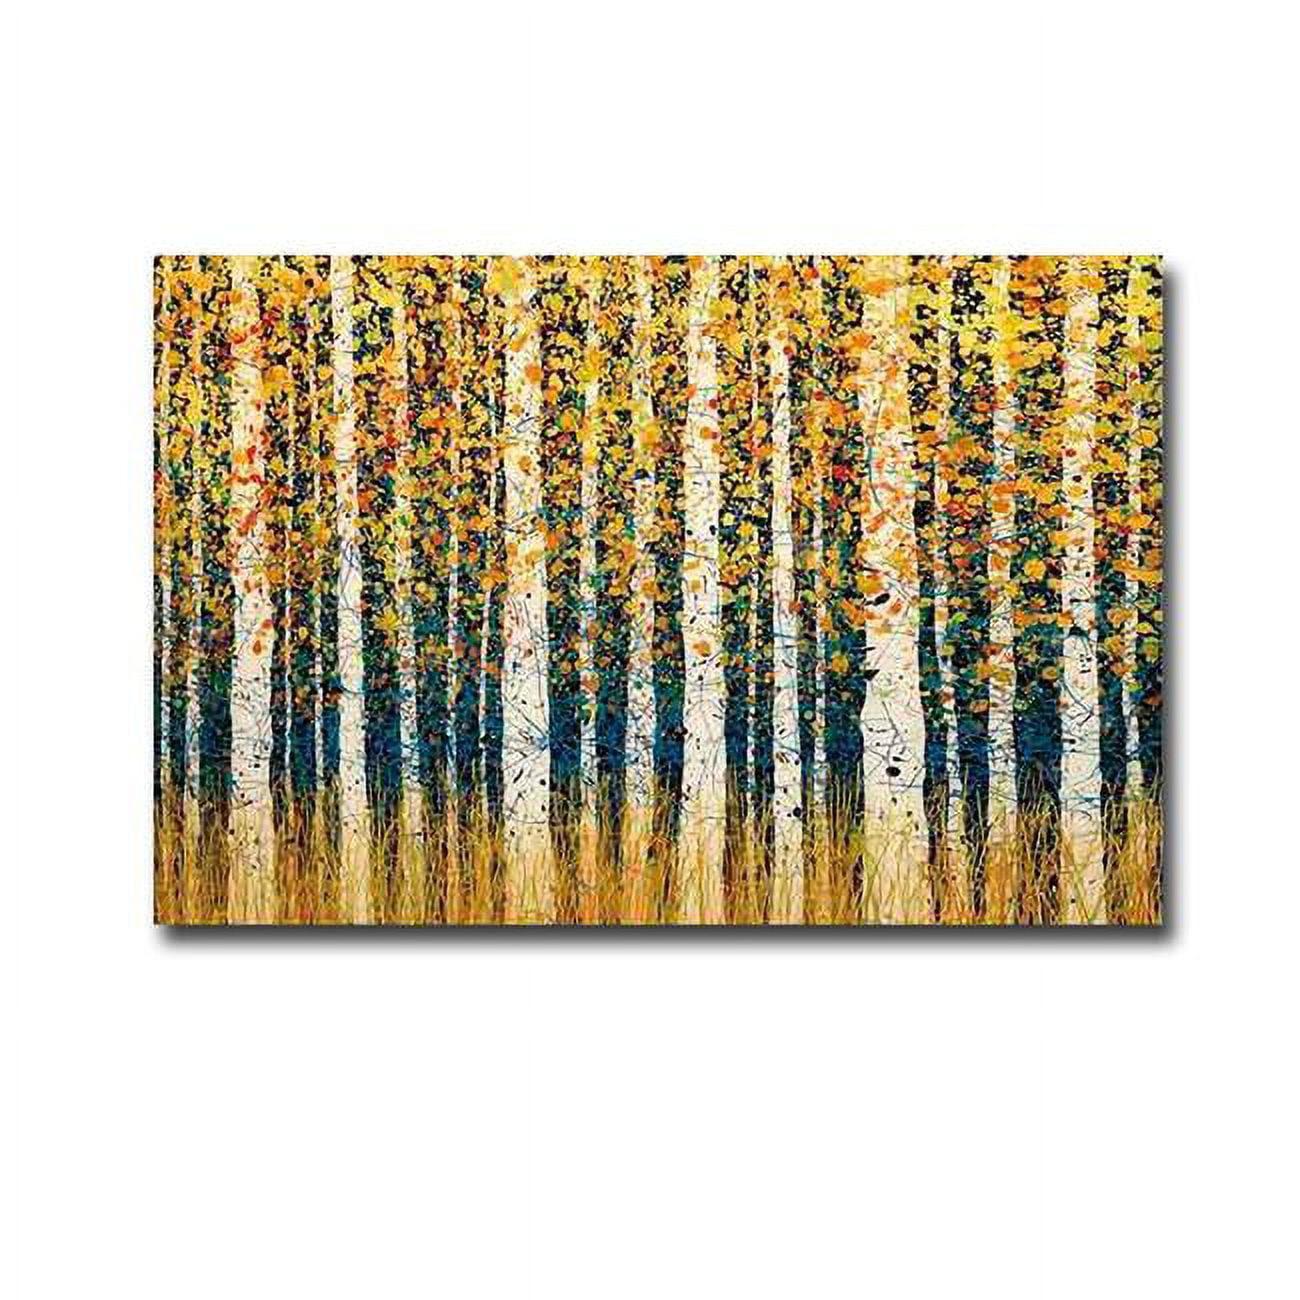 1218544eg Aspen Peace By Daniel Lager Premium Gallery-wrapped Canvas Giclee Art - 12 X 18 In.